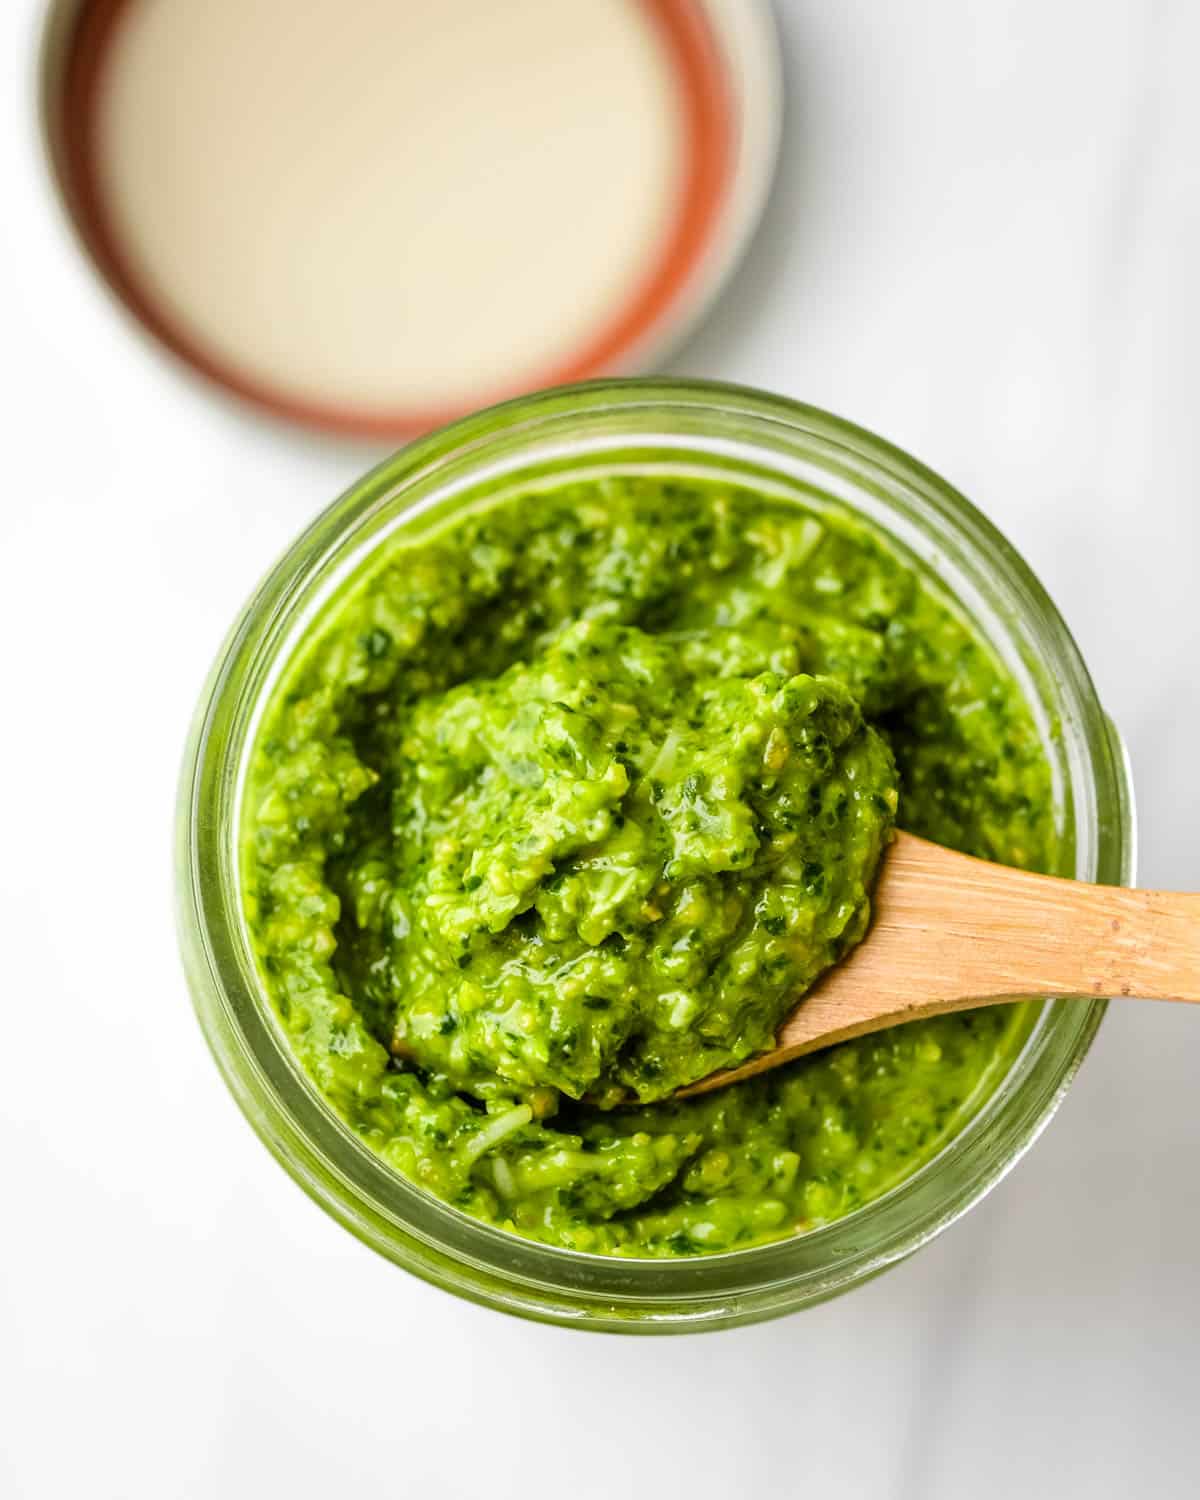 Scooping out the spinach pesto from a jar.